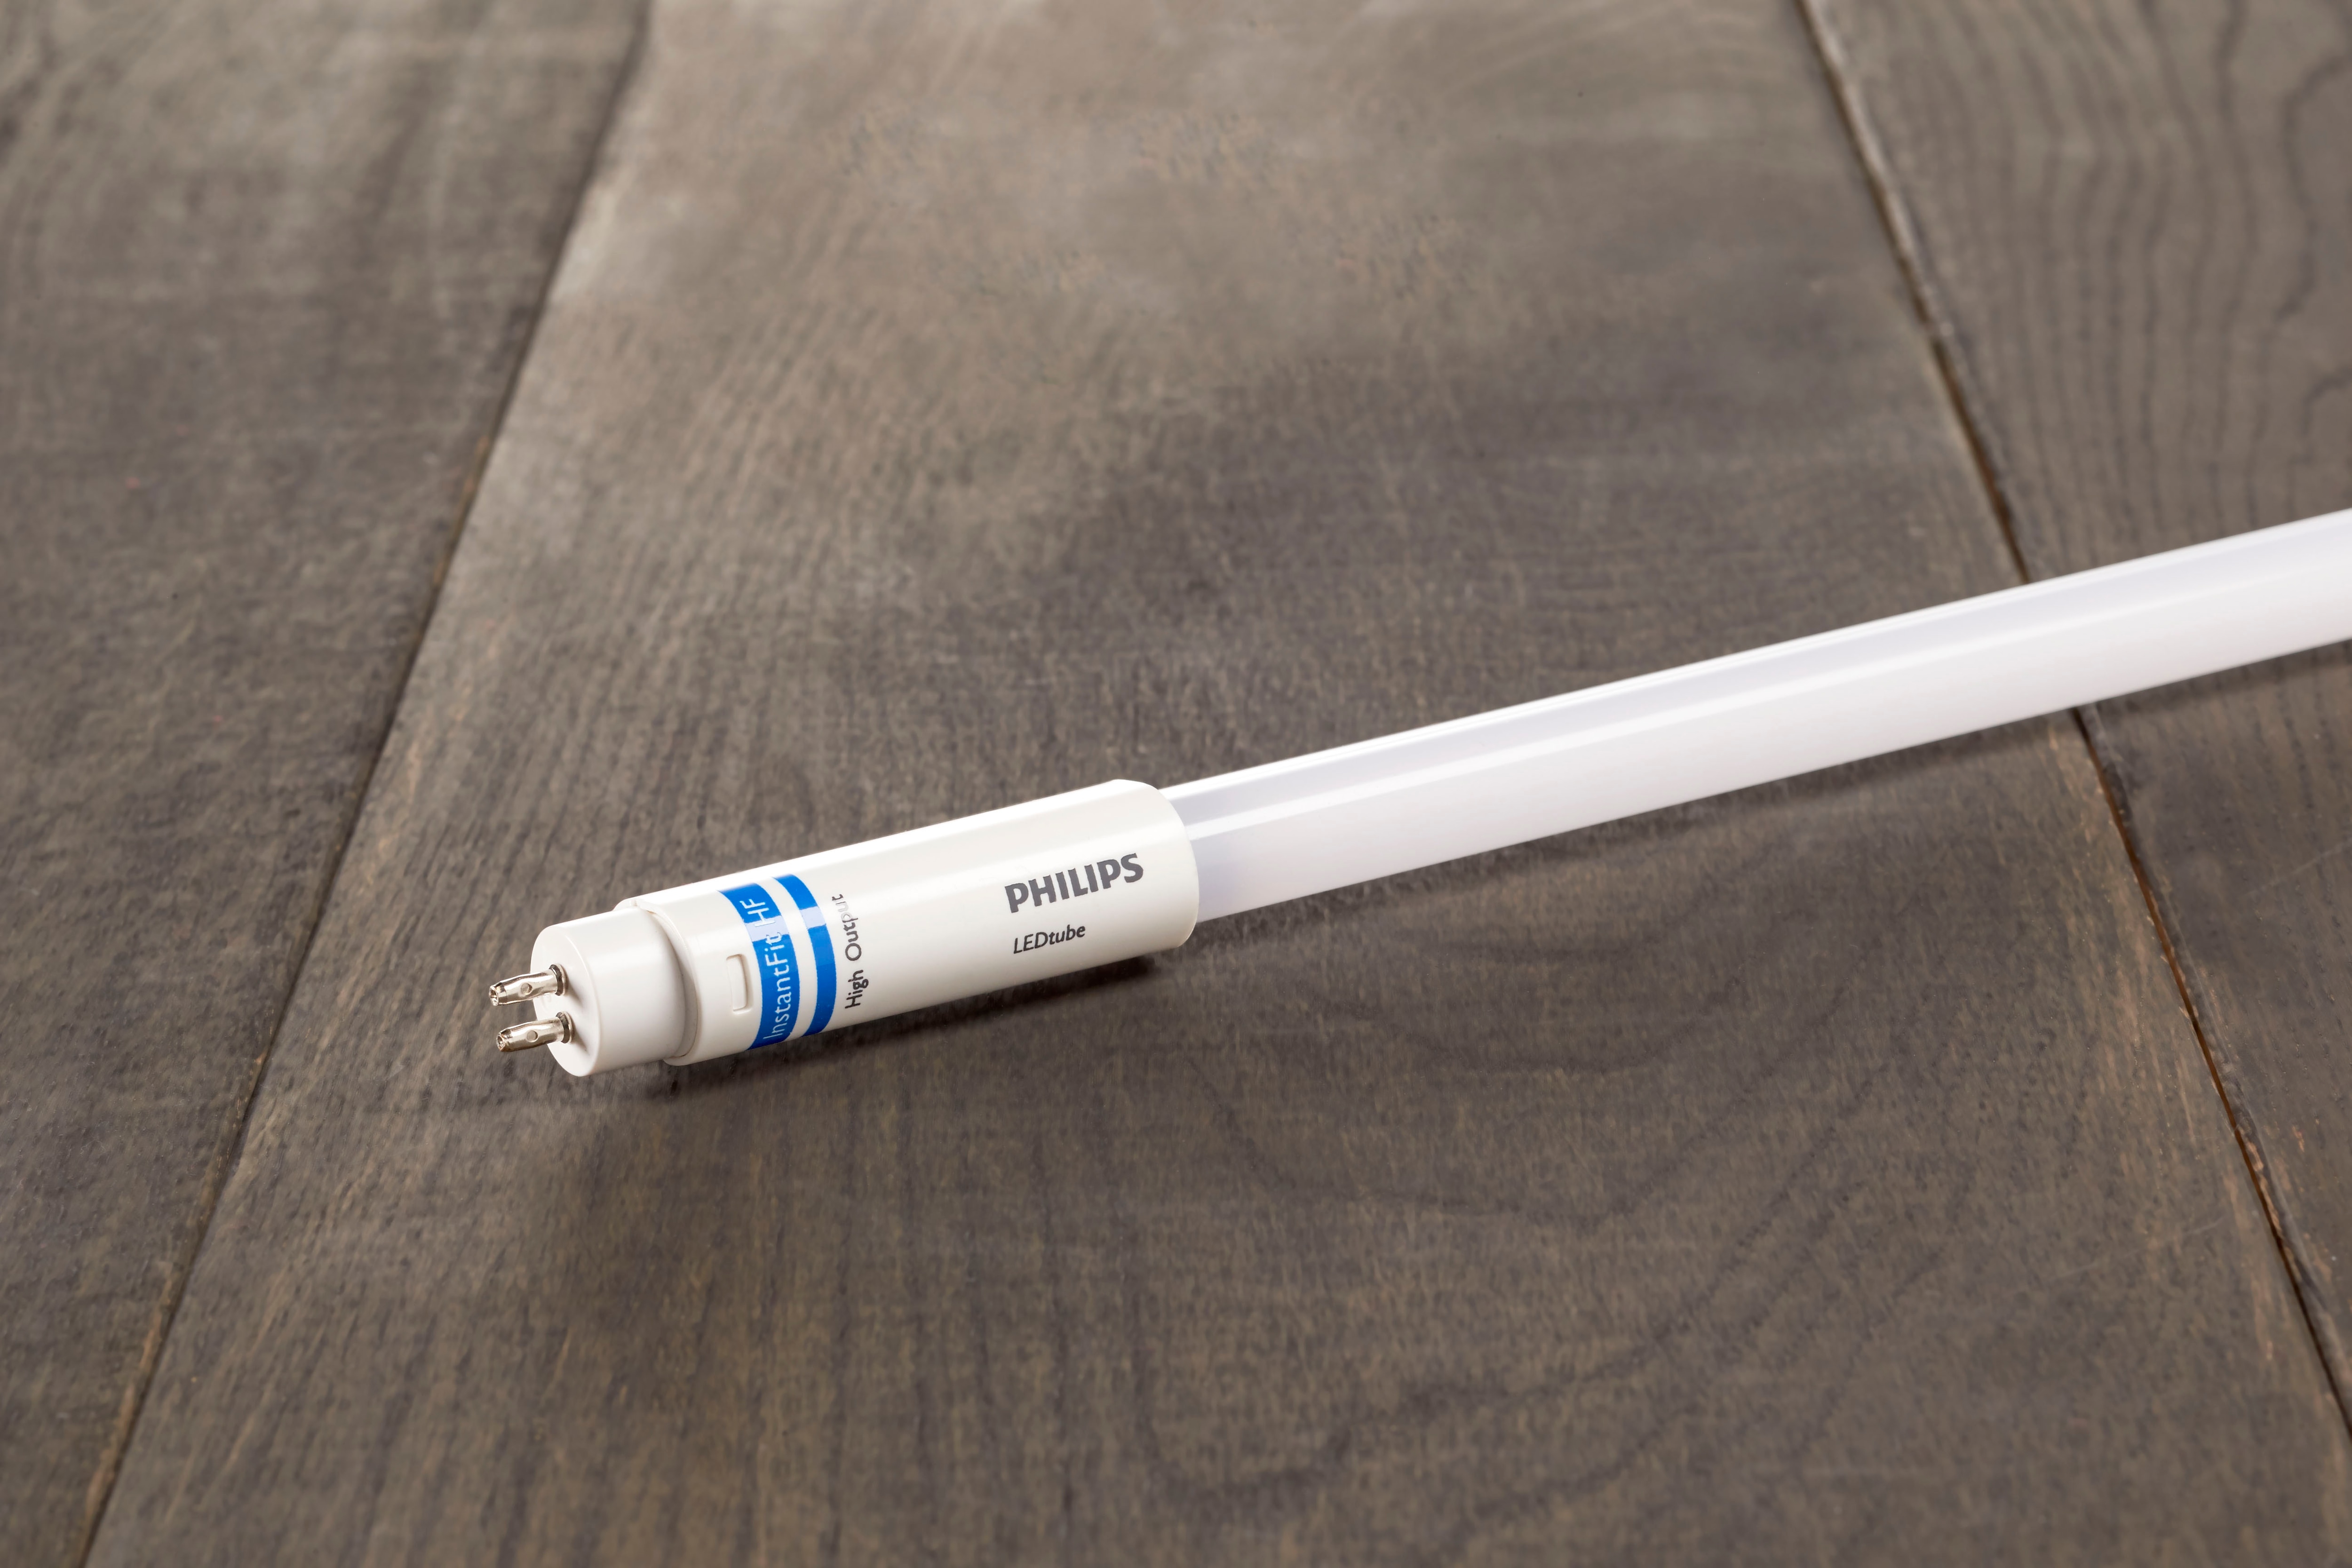 Philips Lighting introduces the new T5 LED tube for the professional market - Newsroom Ligthing